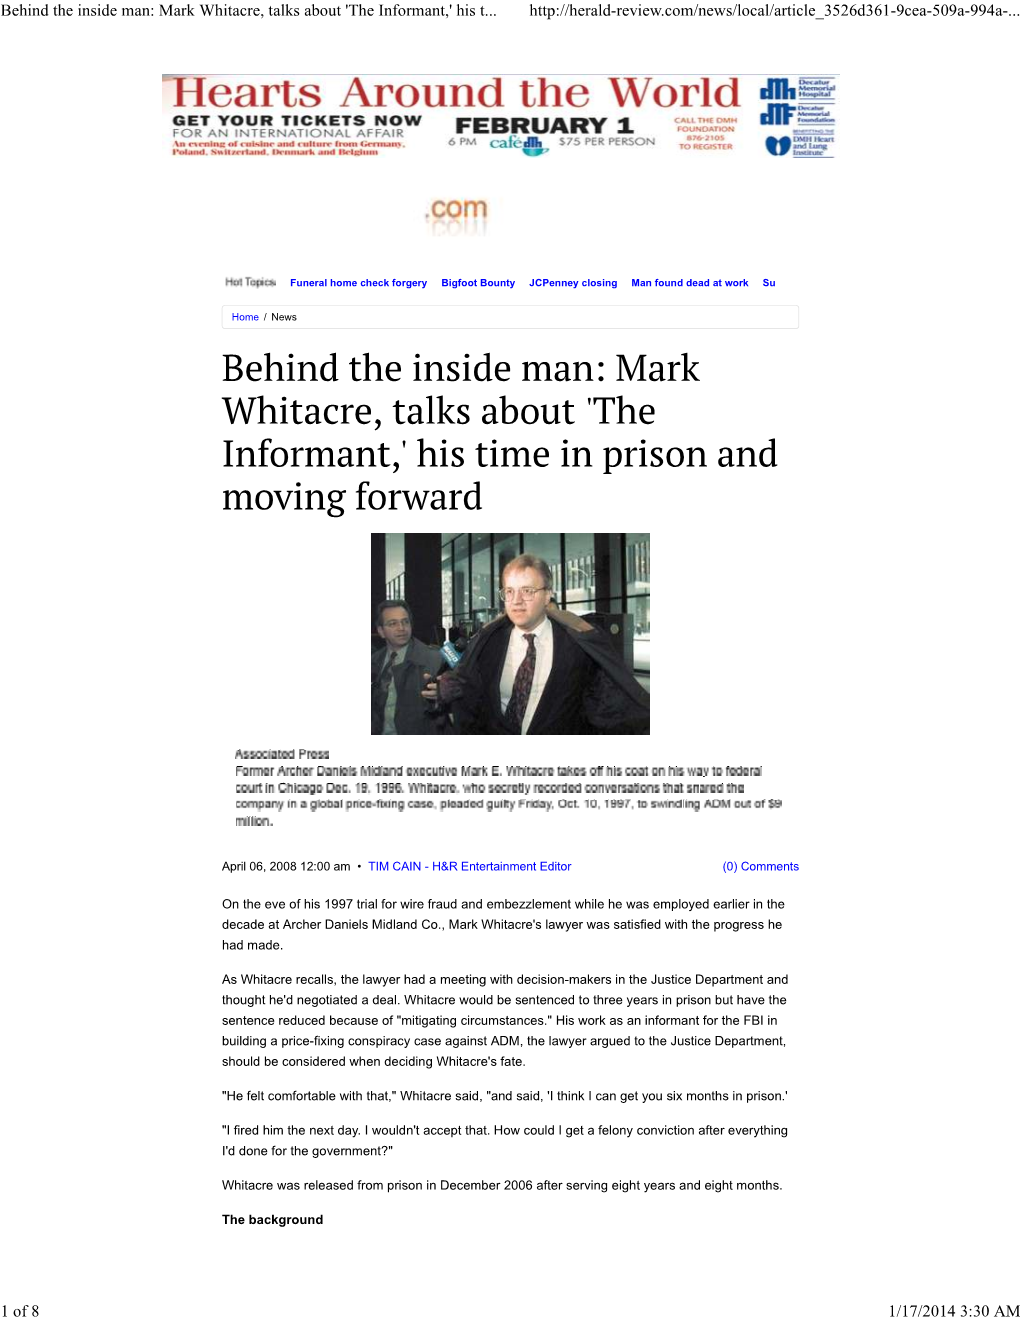 Behind the Inside Man: Mark Whitacre, Talks About 'The Informant,' His T